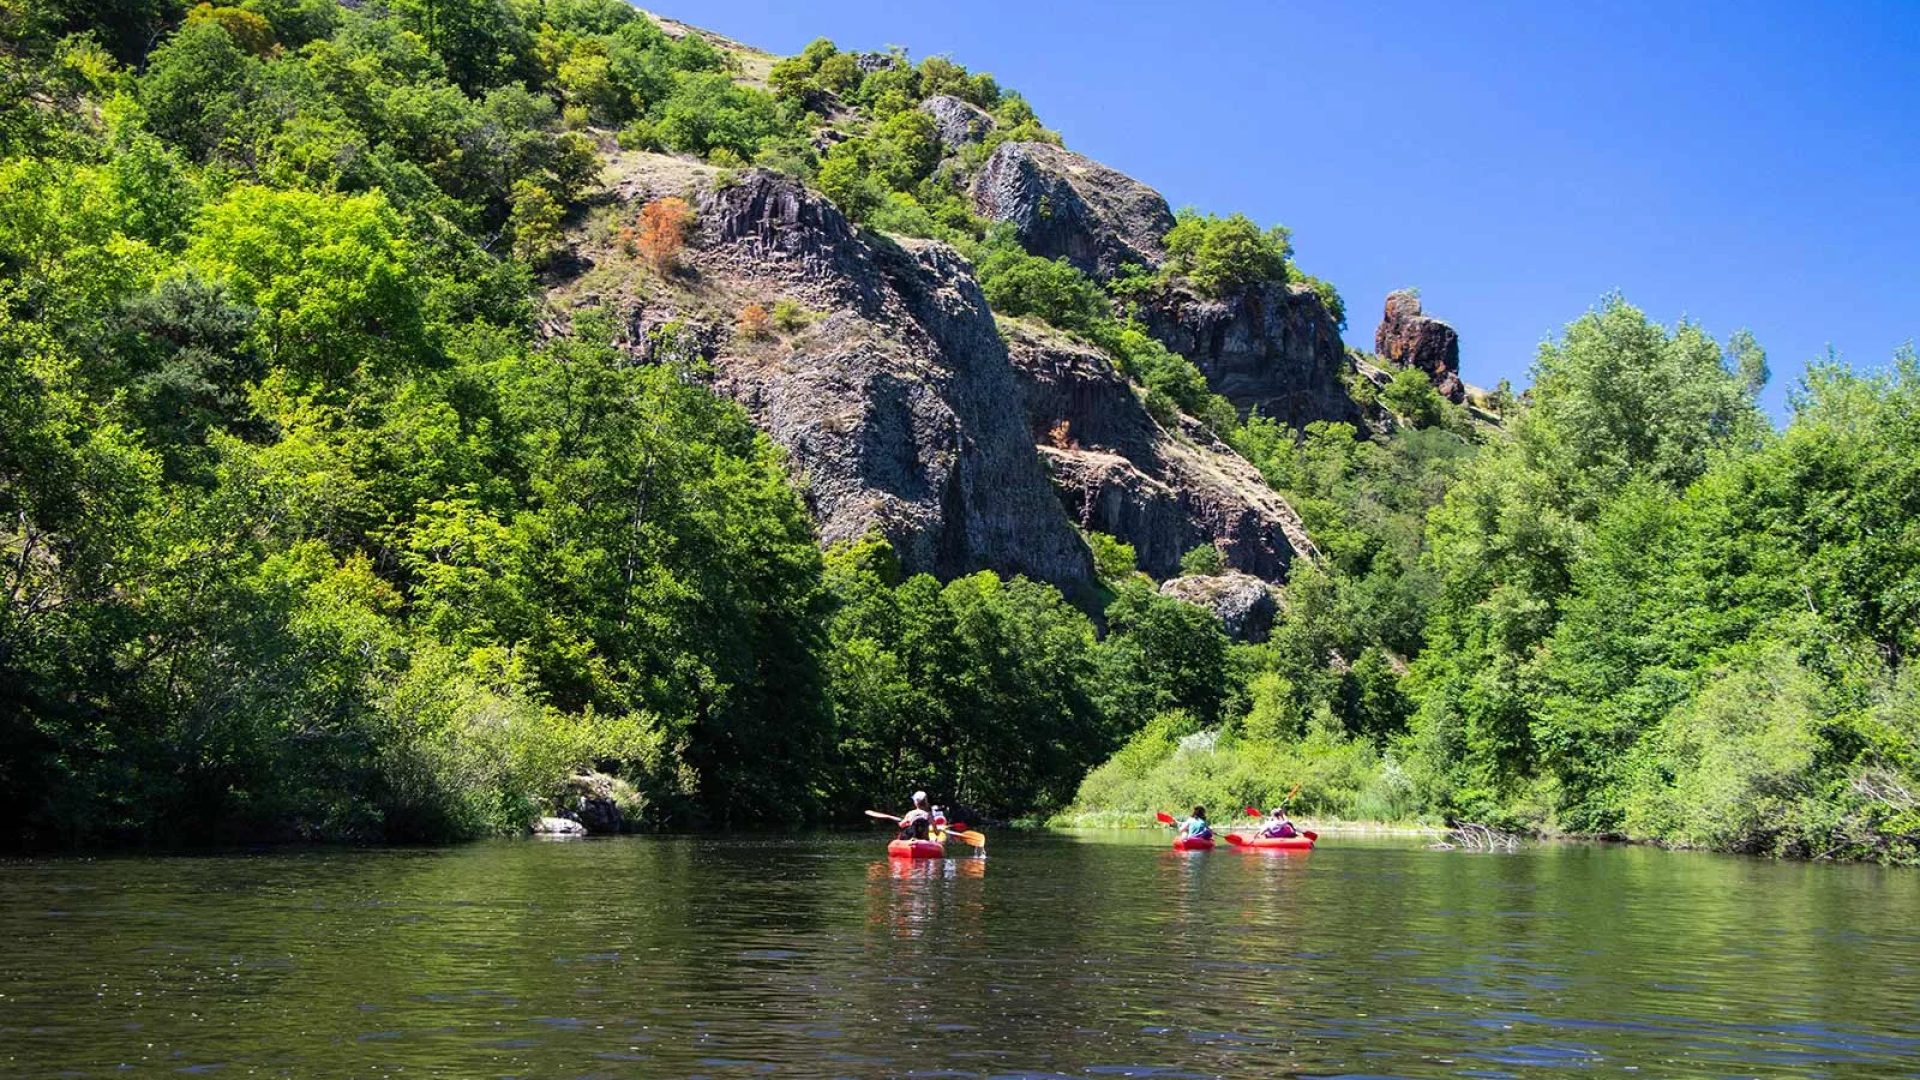 A group of canoes in the Gorges de l'Allier in Haute-Loire, Auvergne